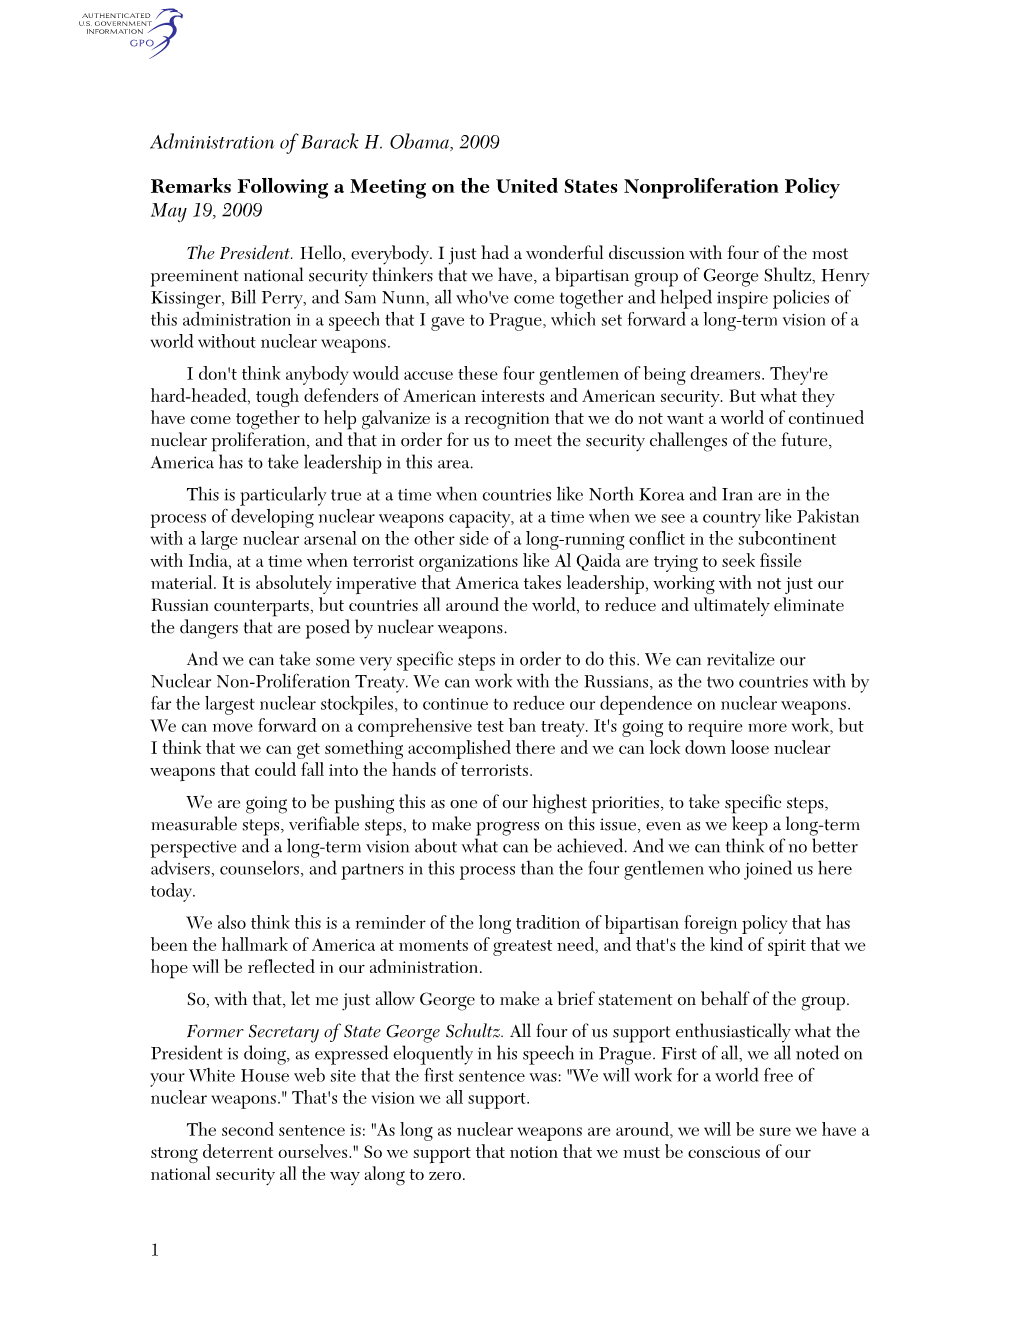 Administration of Barack H. Obama, 2009 Remarks Following a Meeting